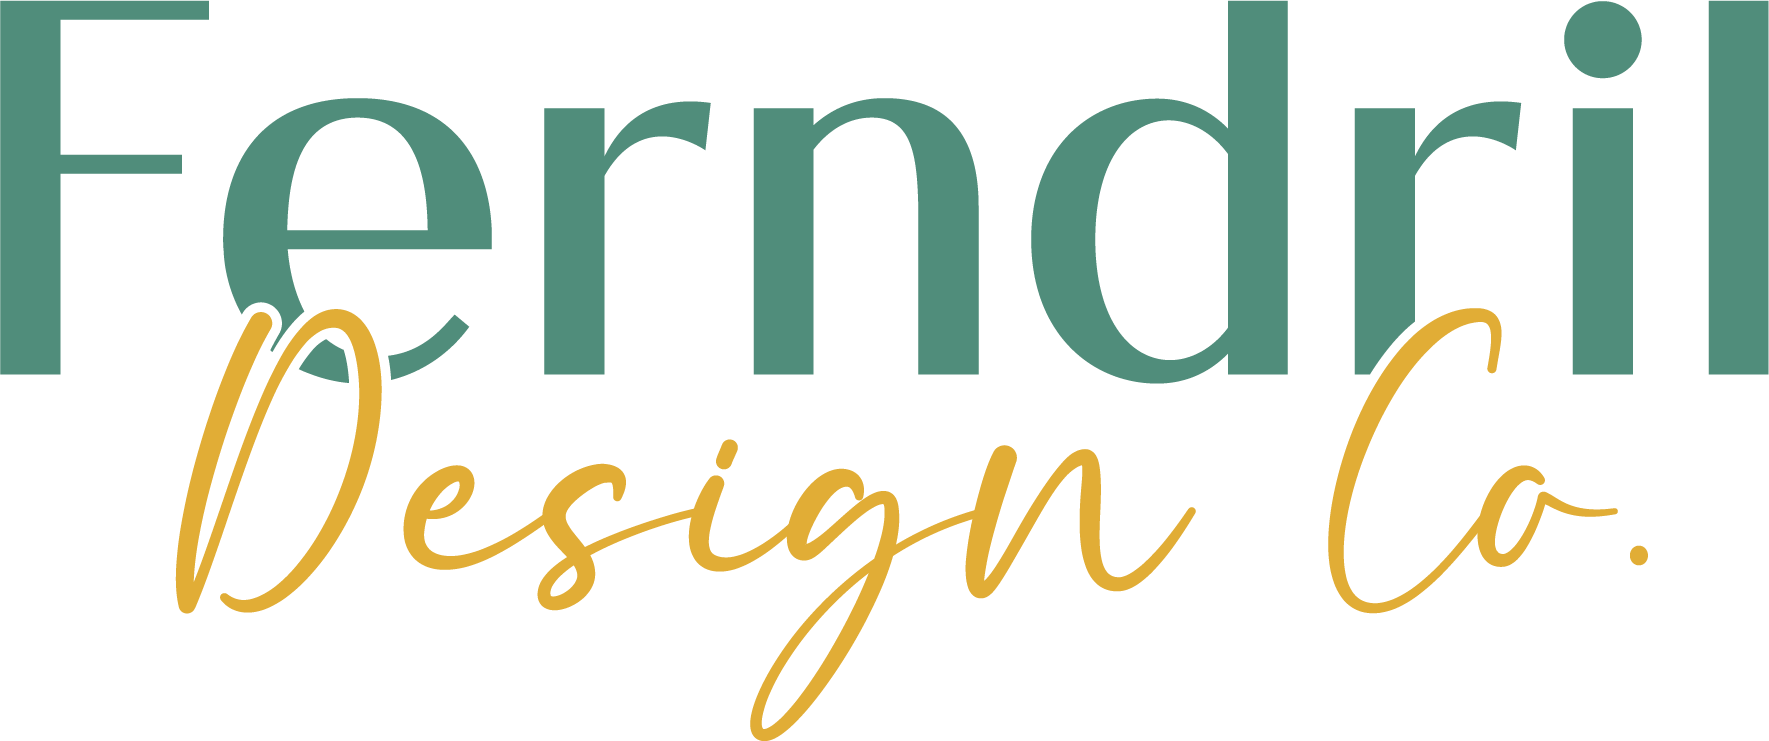 Ferndril Design Co. is a Sydney NSW based creative agency that offers unmatched branding and website services to startups and businesses of all sizes.